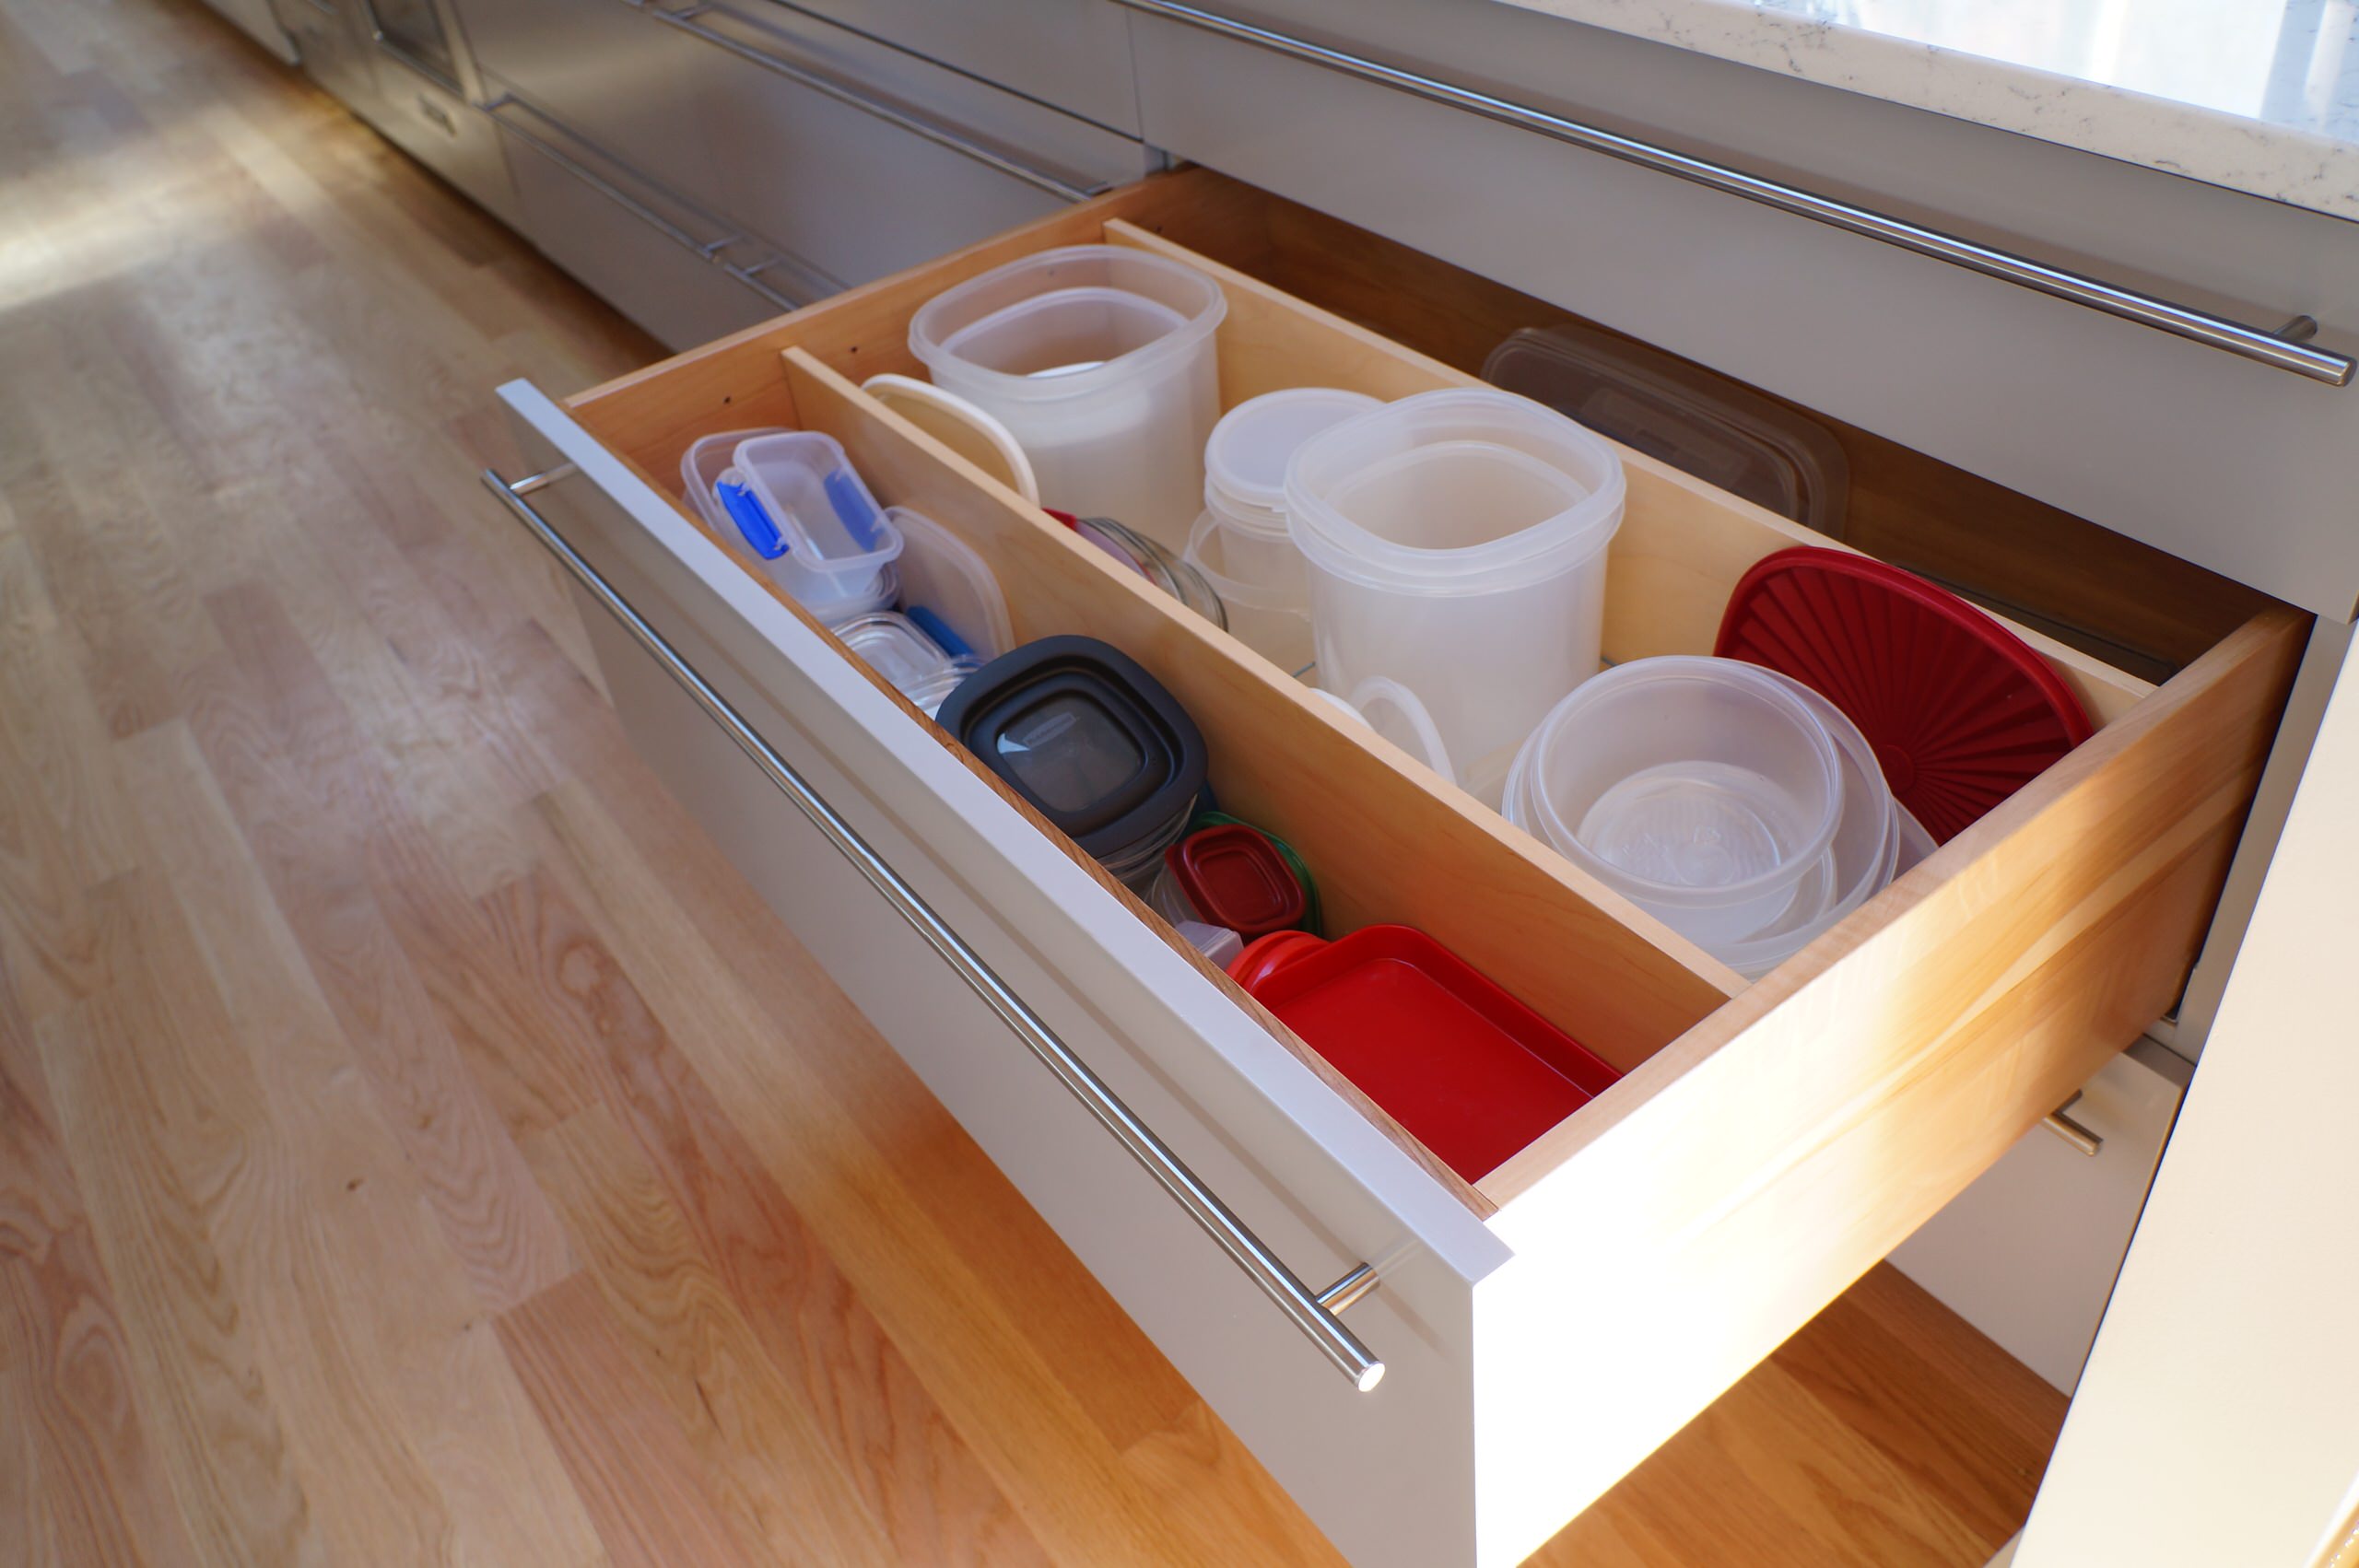 https://st.hzcdn.com/simgs/pictures/kitchens/tupperware-organization-taylor-made-cabinets-leominster-ma-img~cd7159de02ec61c8_14-9039-1-bd63a34.jpg